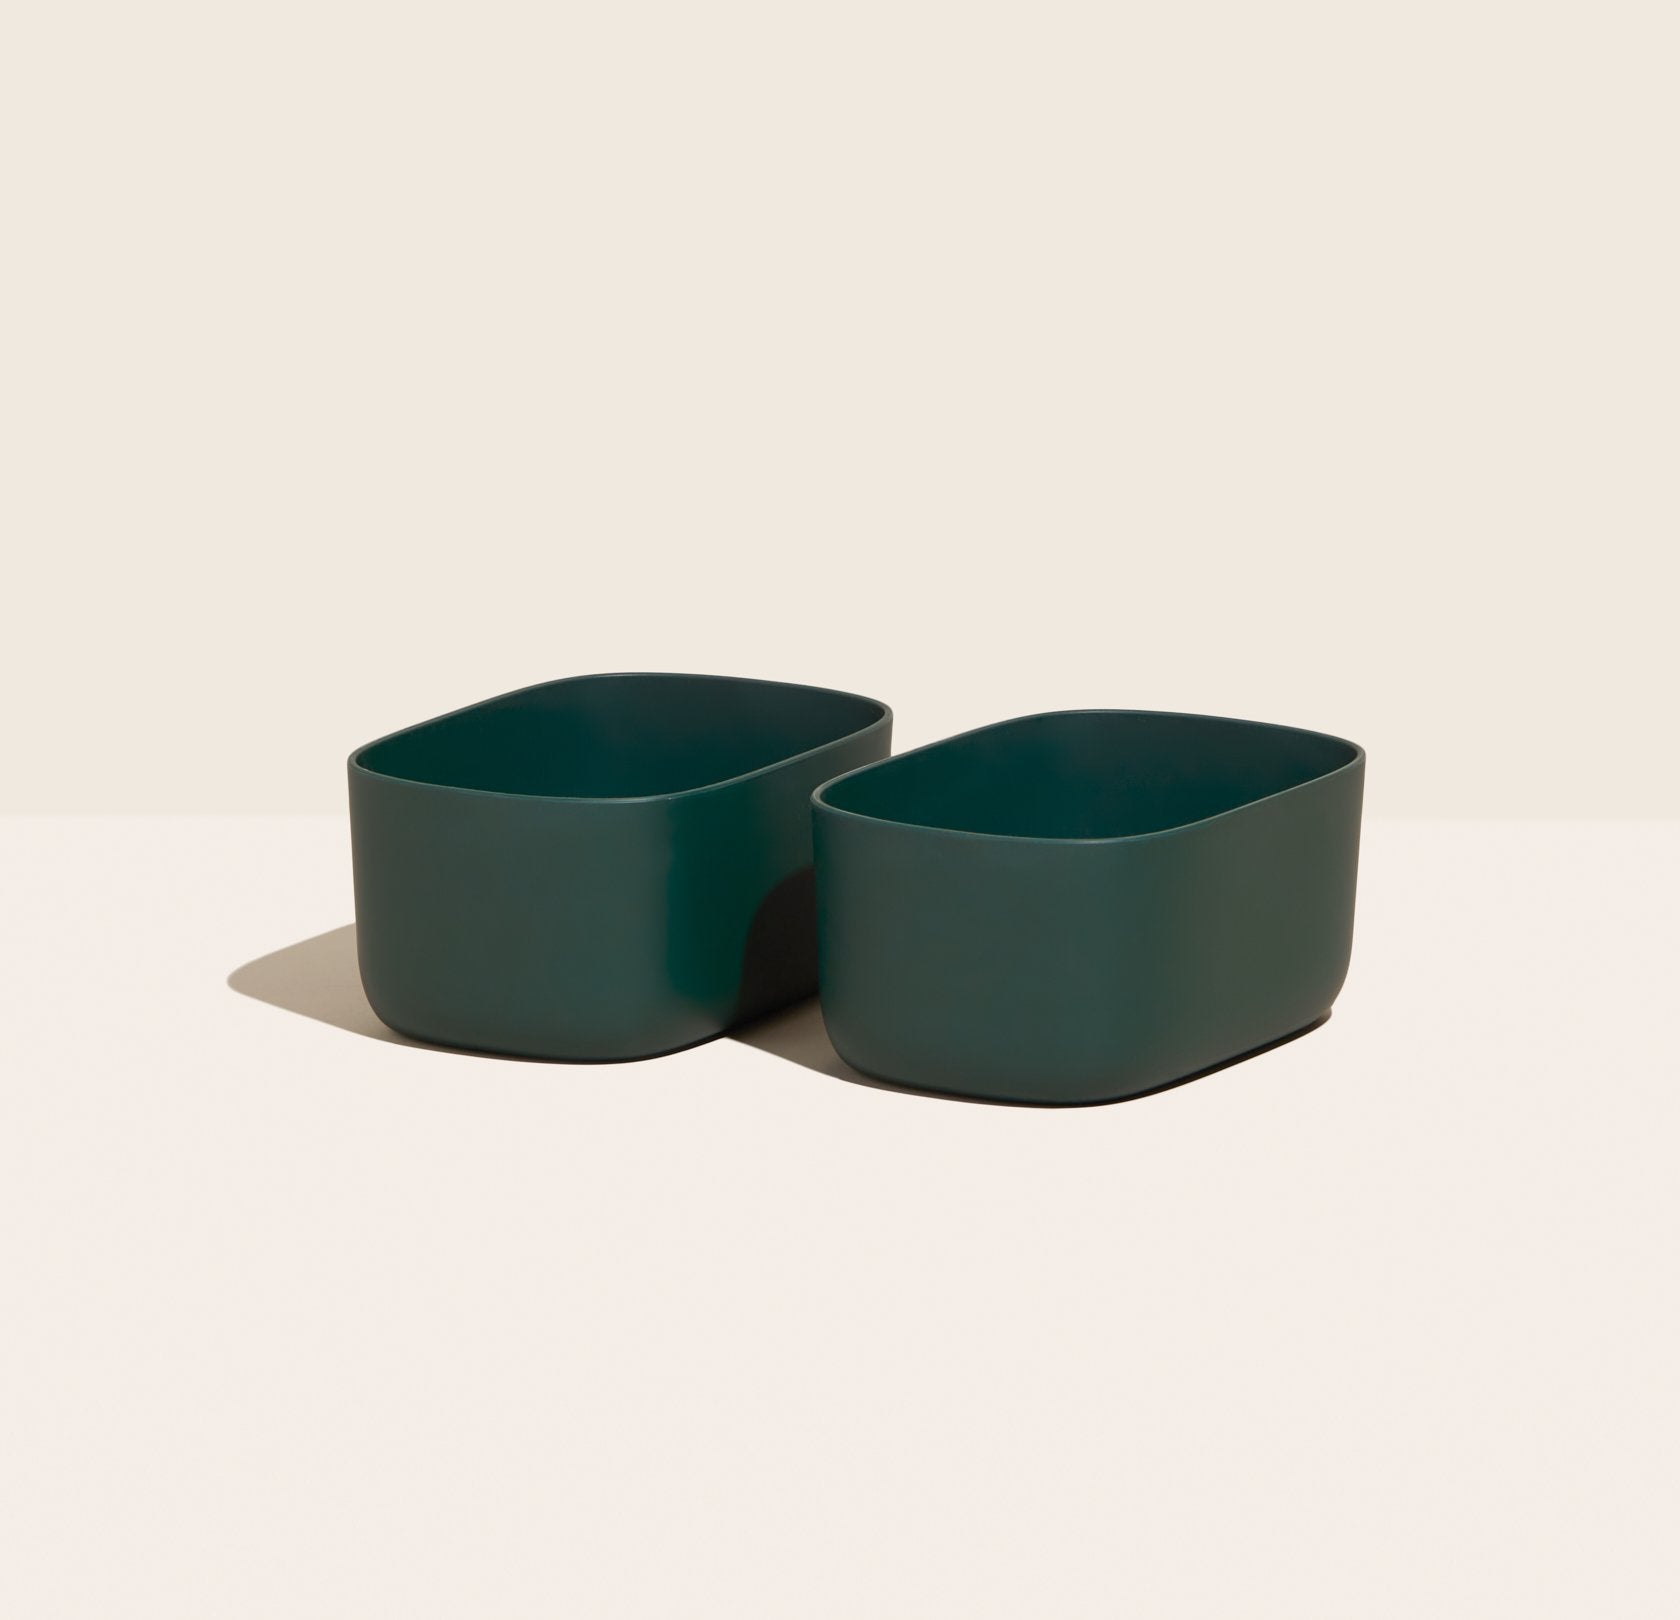 OPEN SPACES Small Storage Bins - Set of 2 - DK GREEN